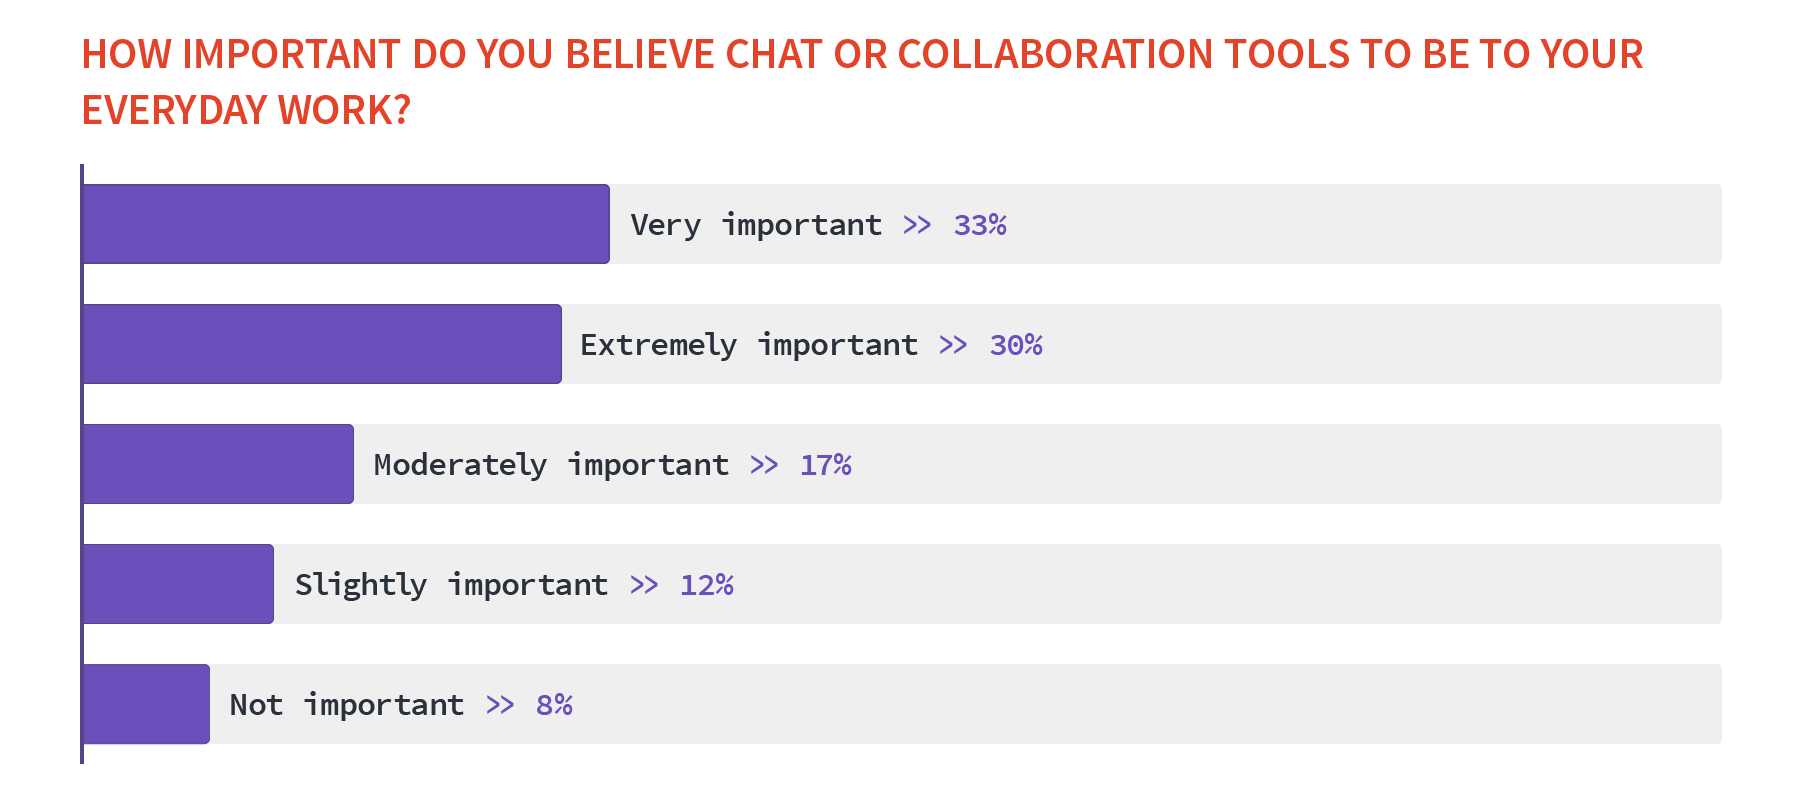 How important collaboration tools are